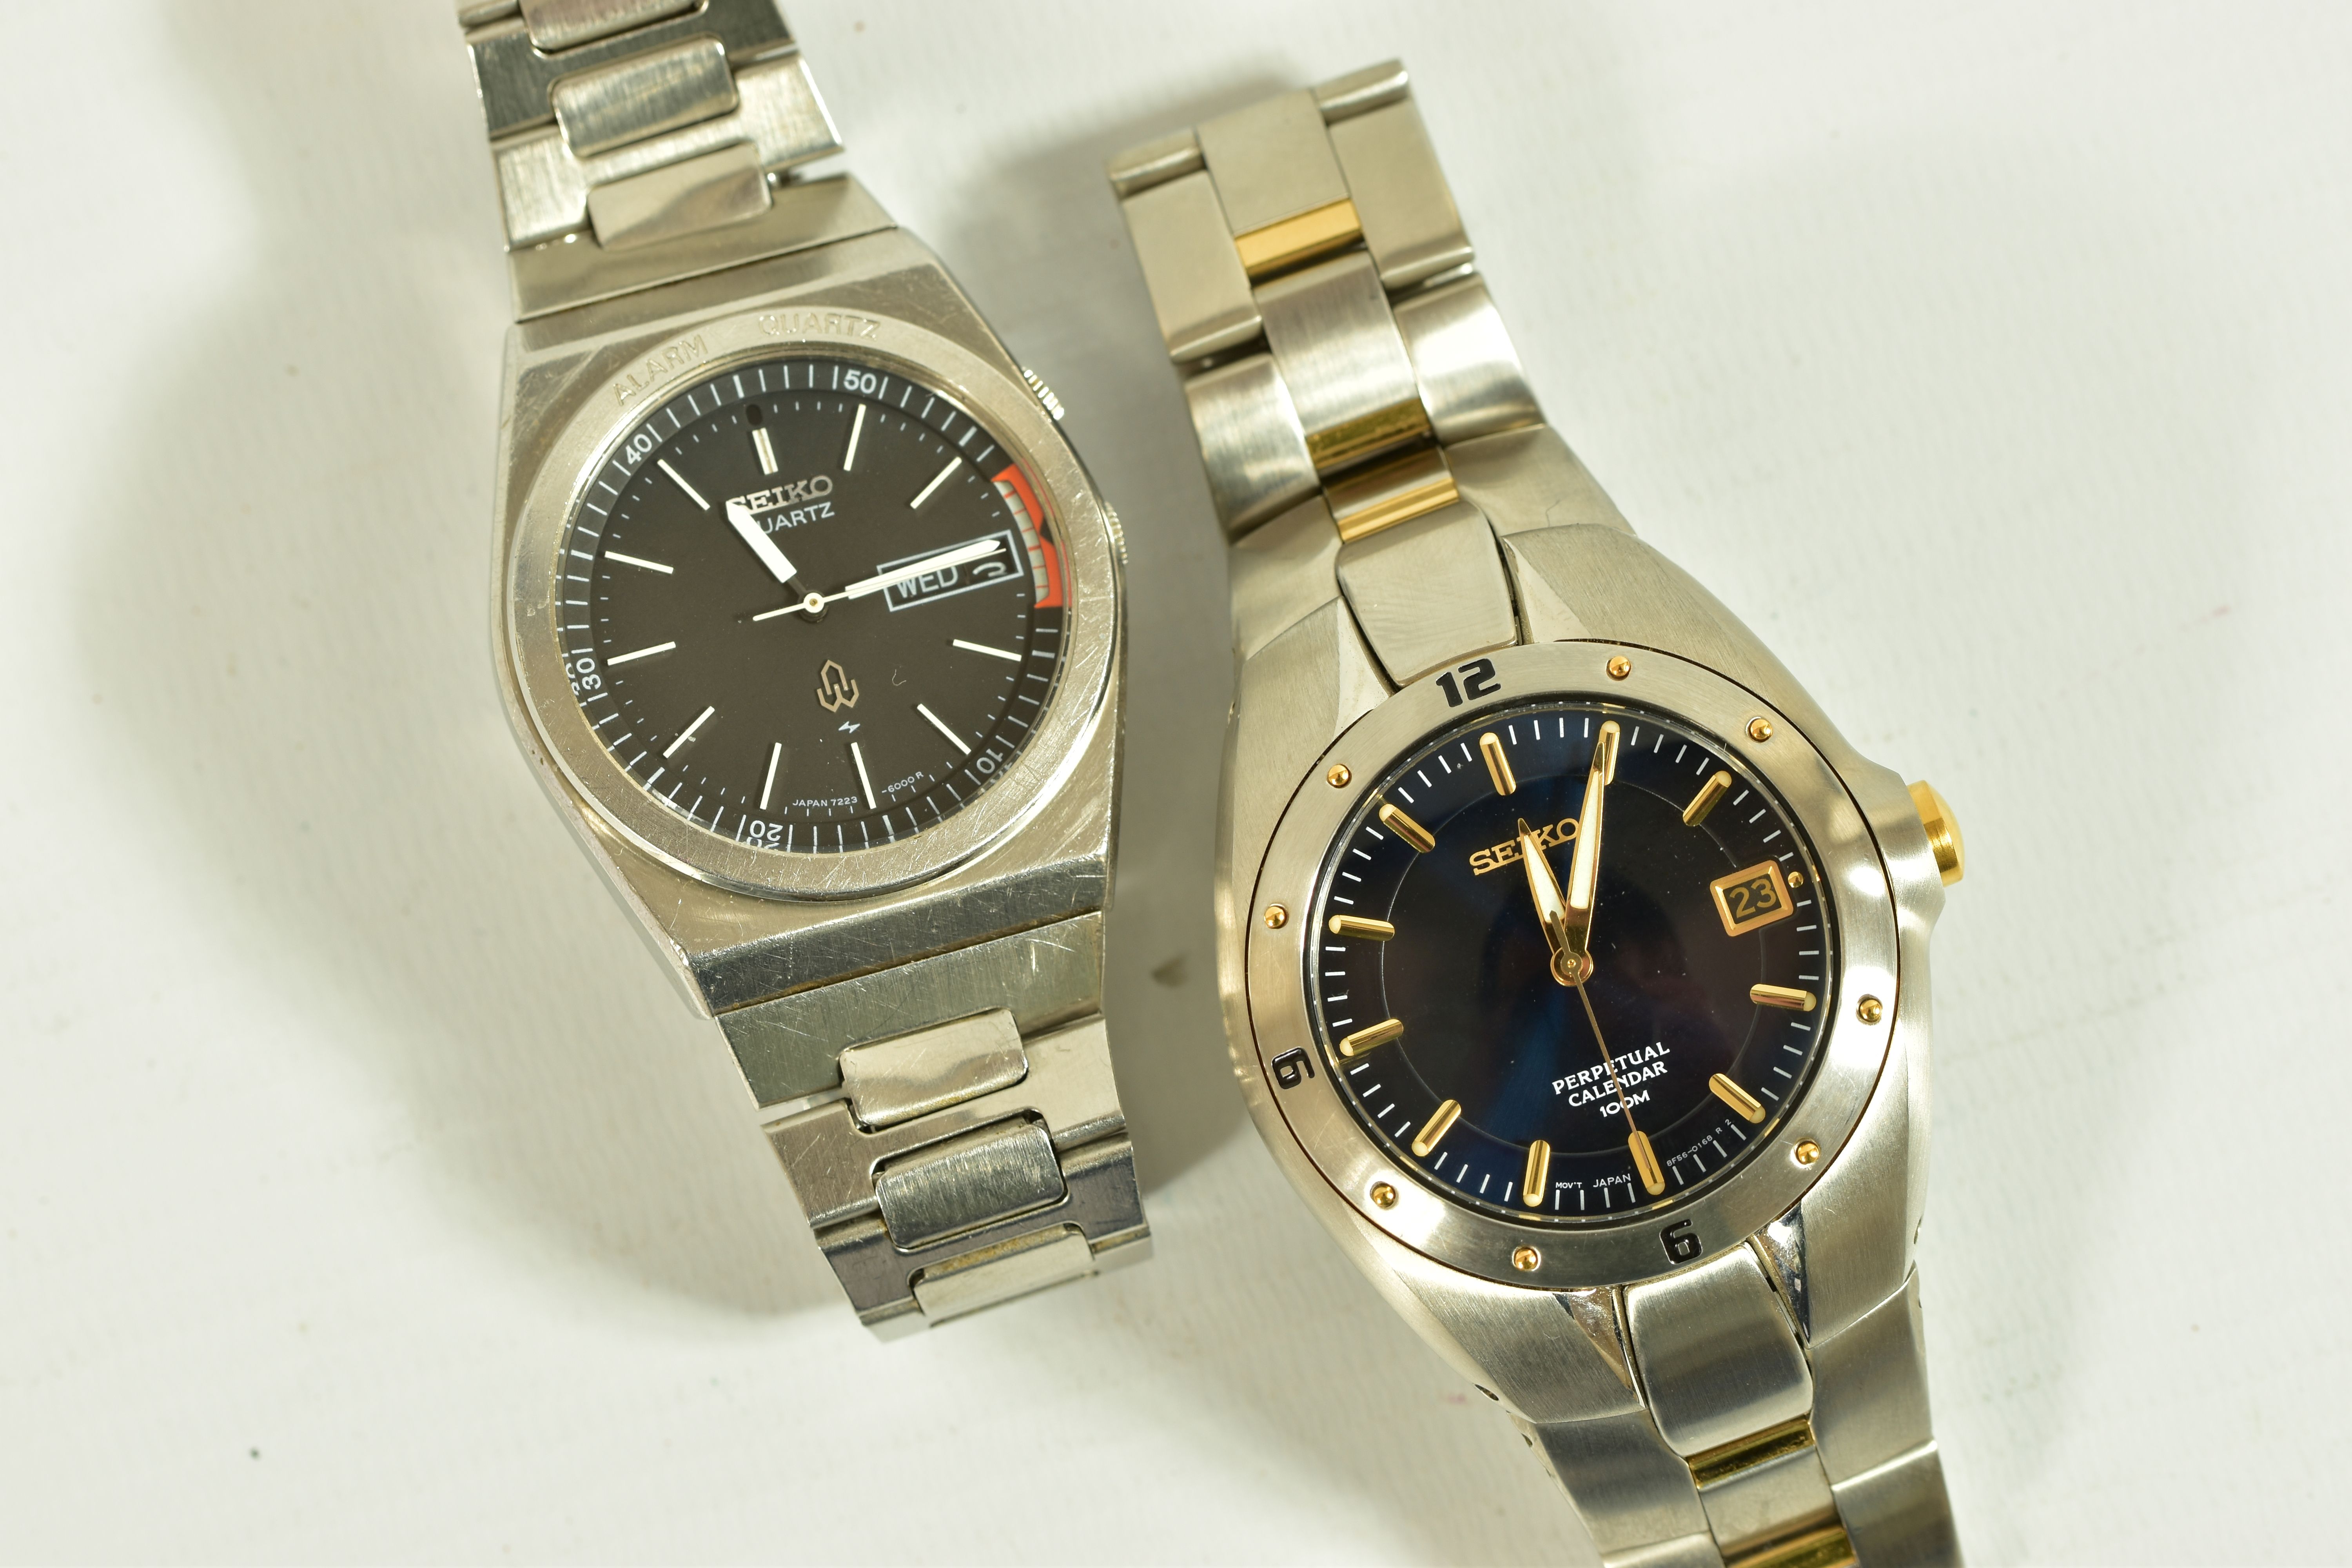 TWO SEIKO WRISTWATCHES, the first a Seiko perpetual calendar watch, dark blue dial with gold